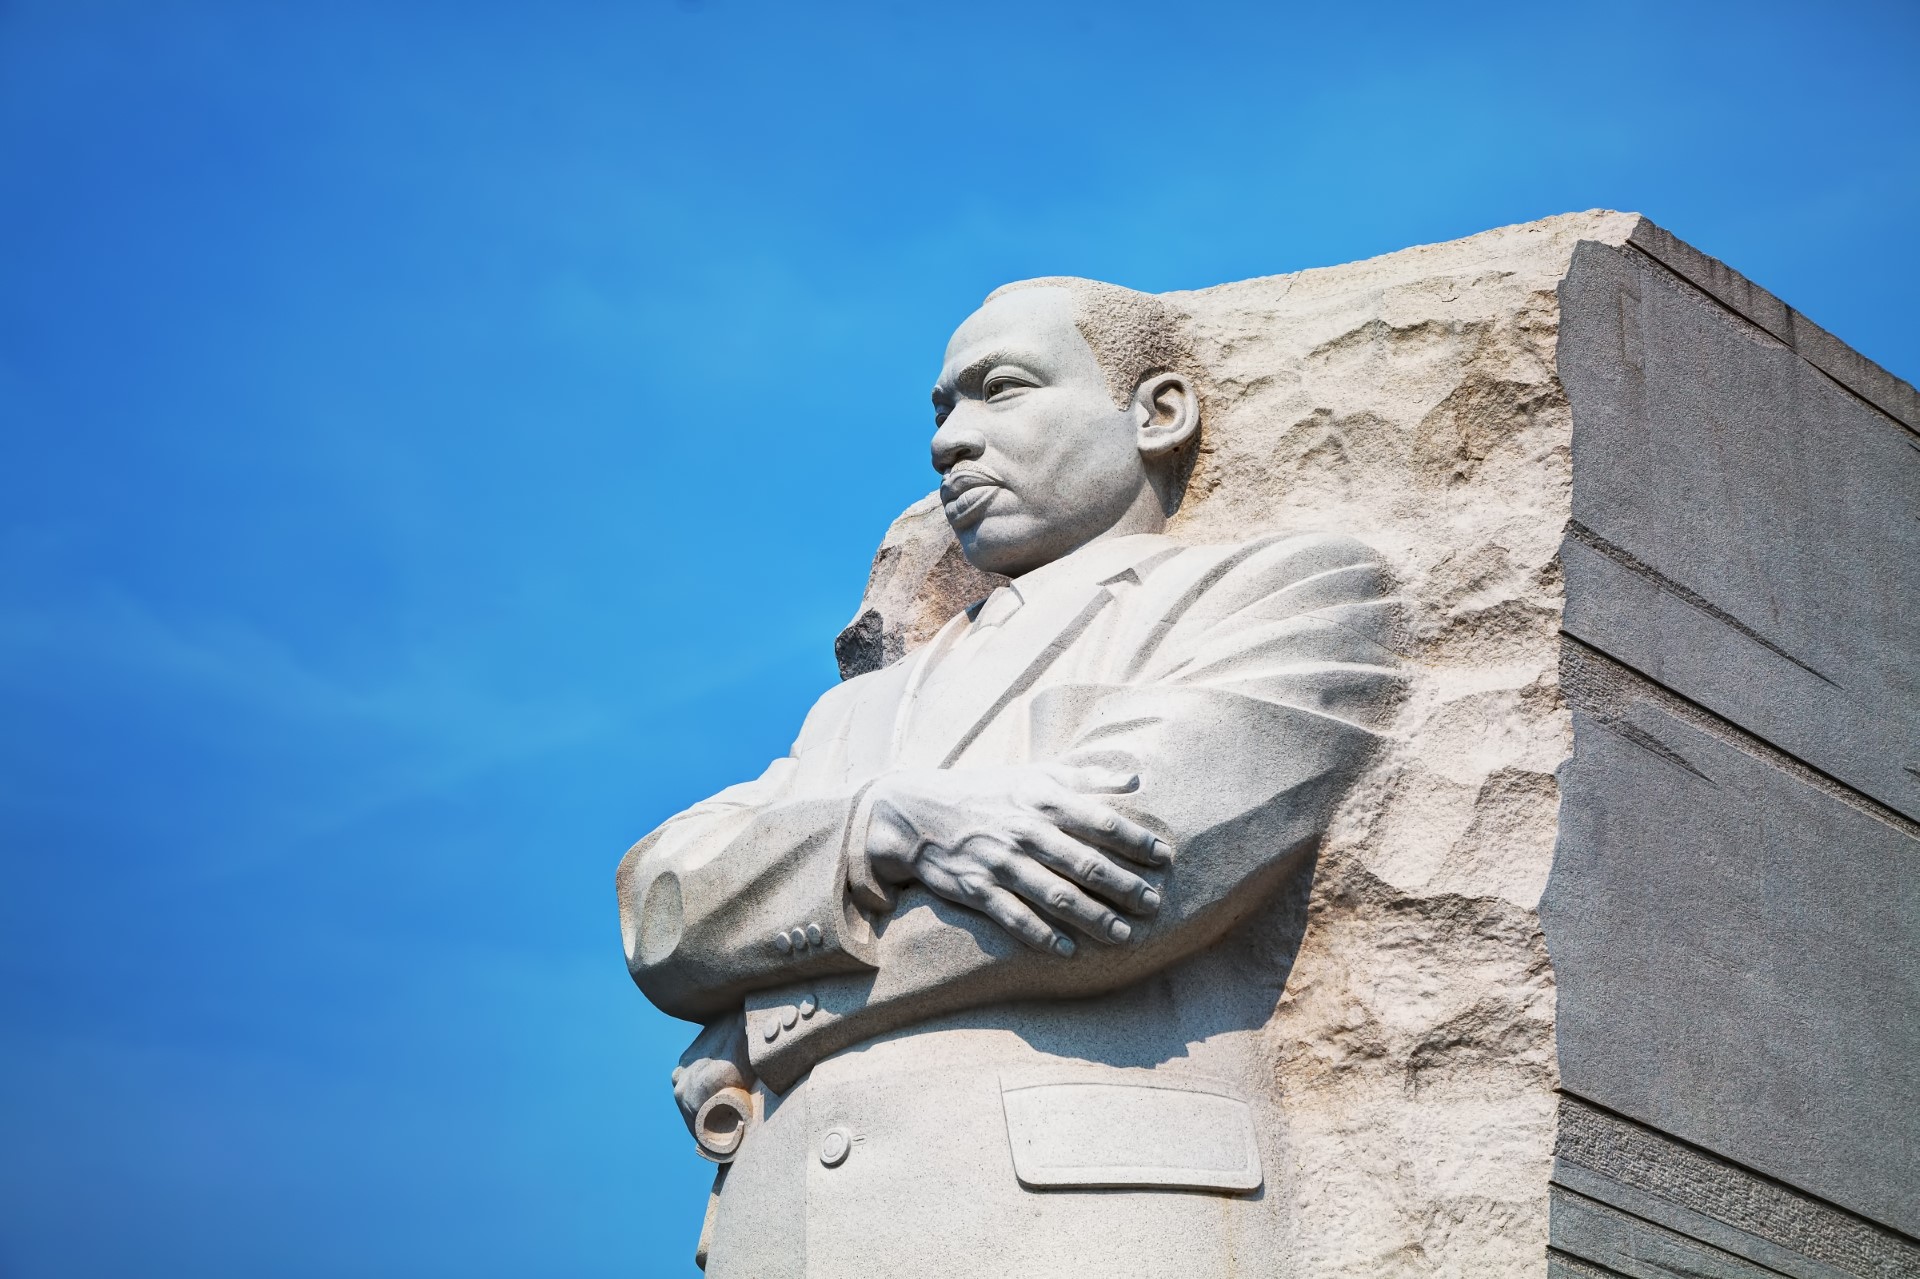 Memorial statue of Dr. Martin Luther King, Jr., in Washington DC